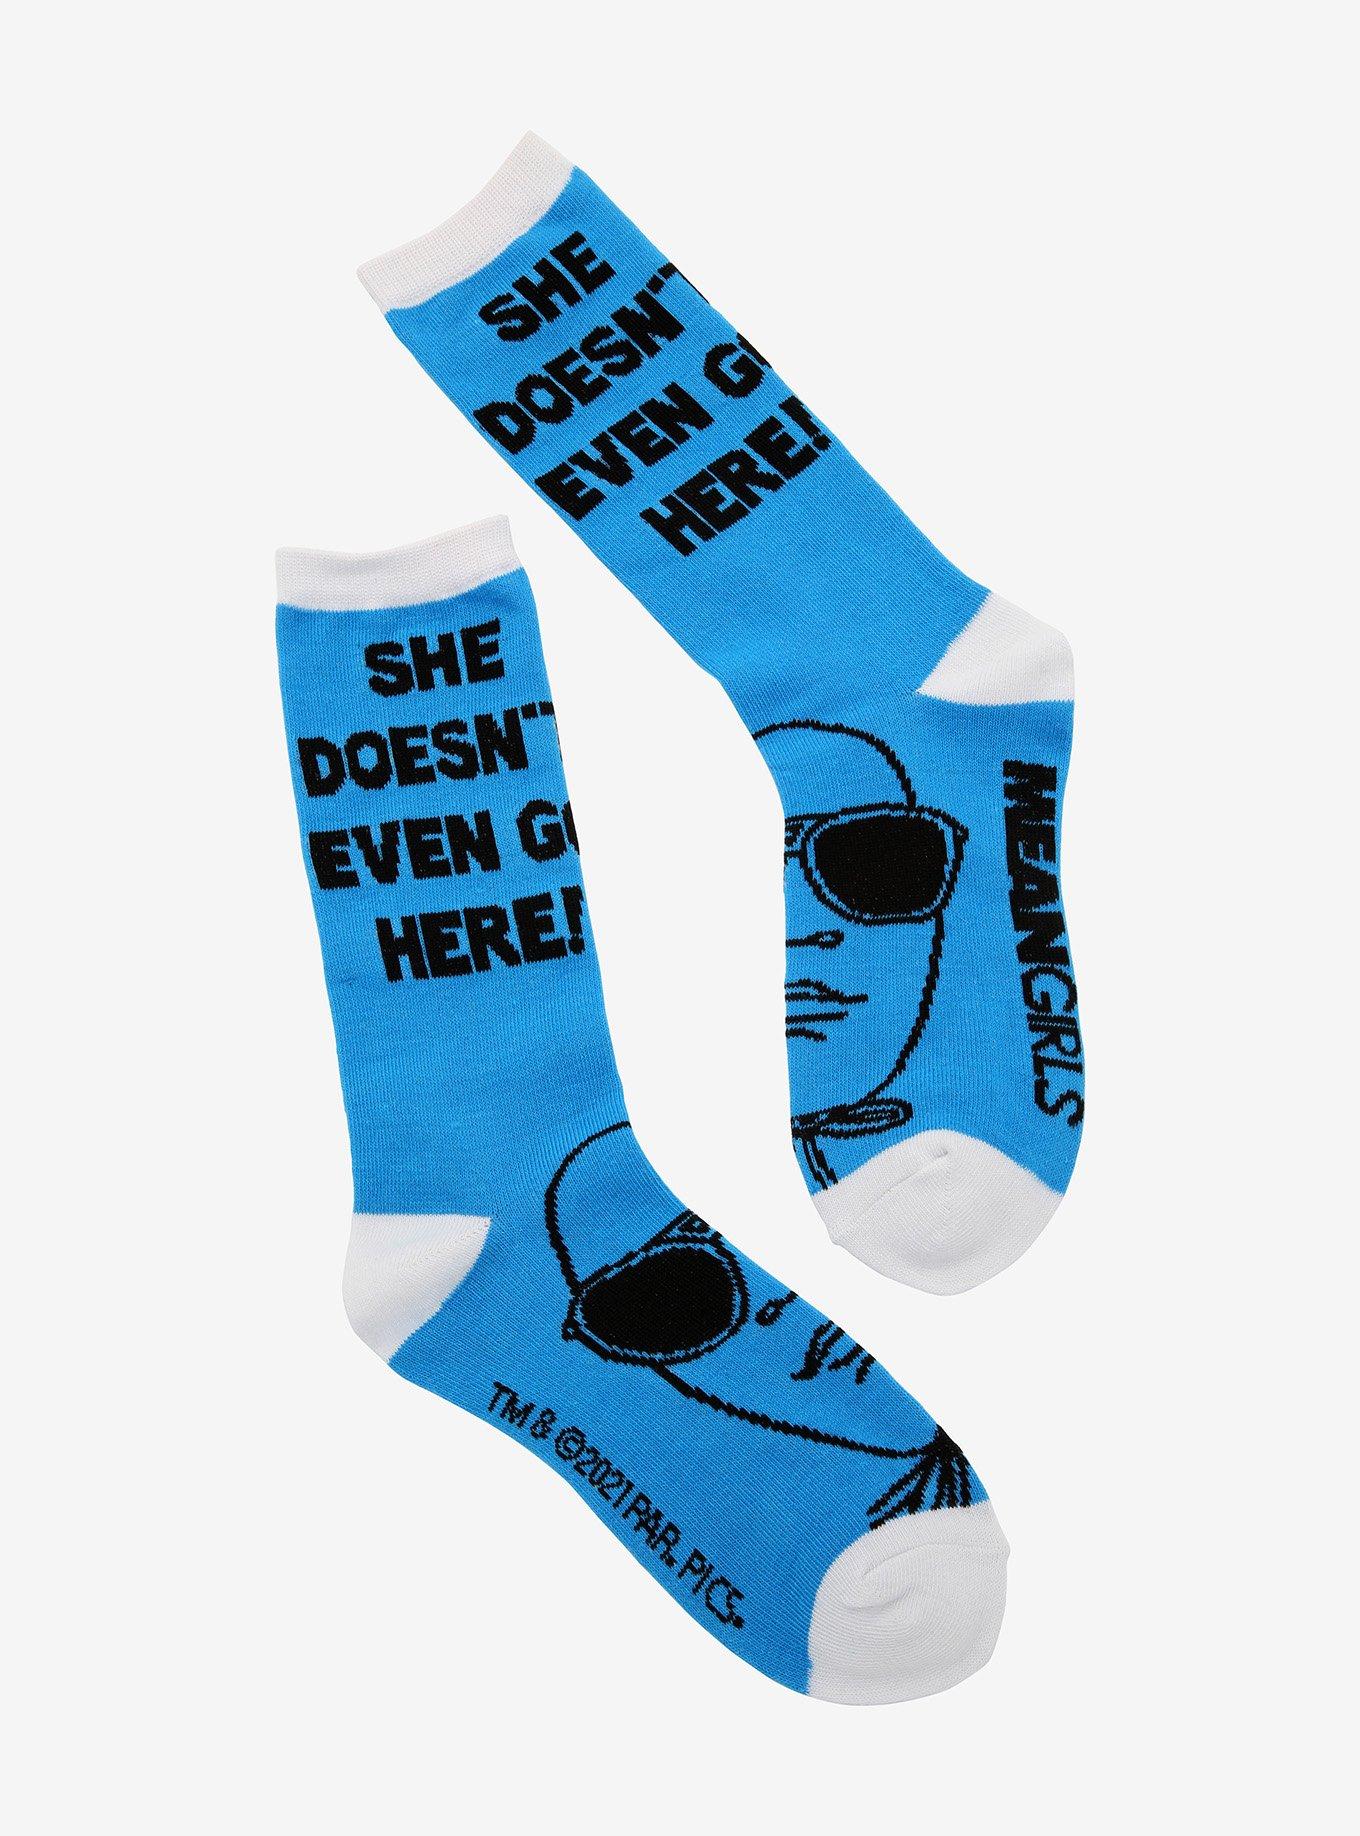 Mean Girls Doesn't Even Go Here Crew Socks, , hi-res